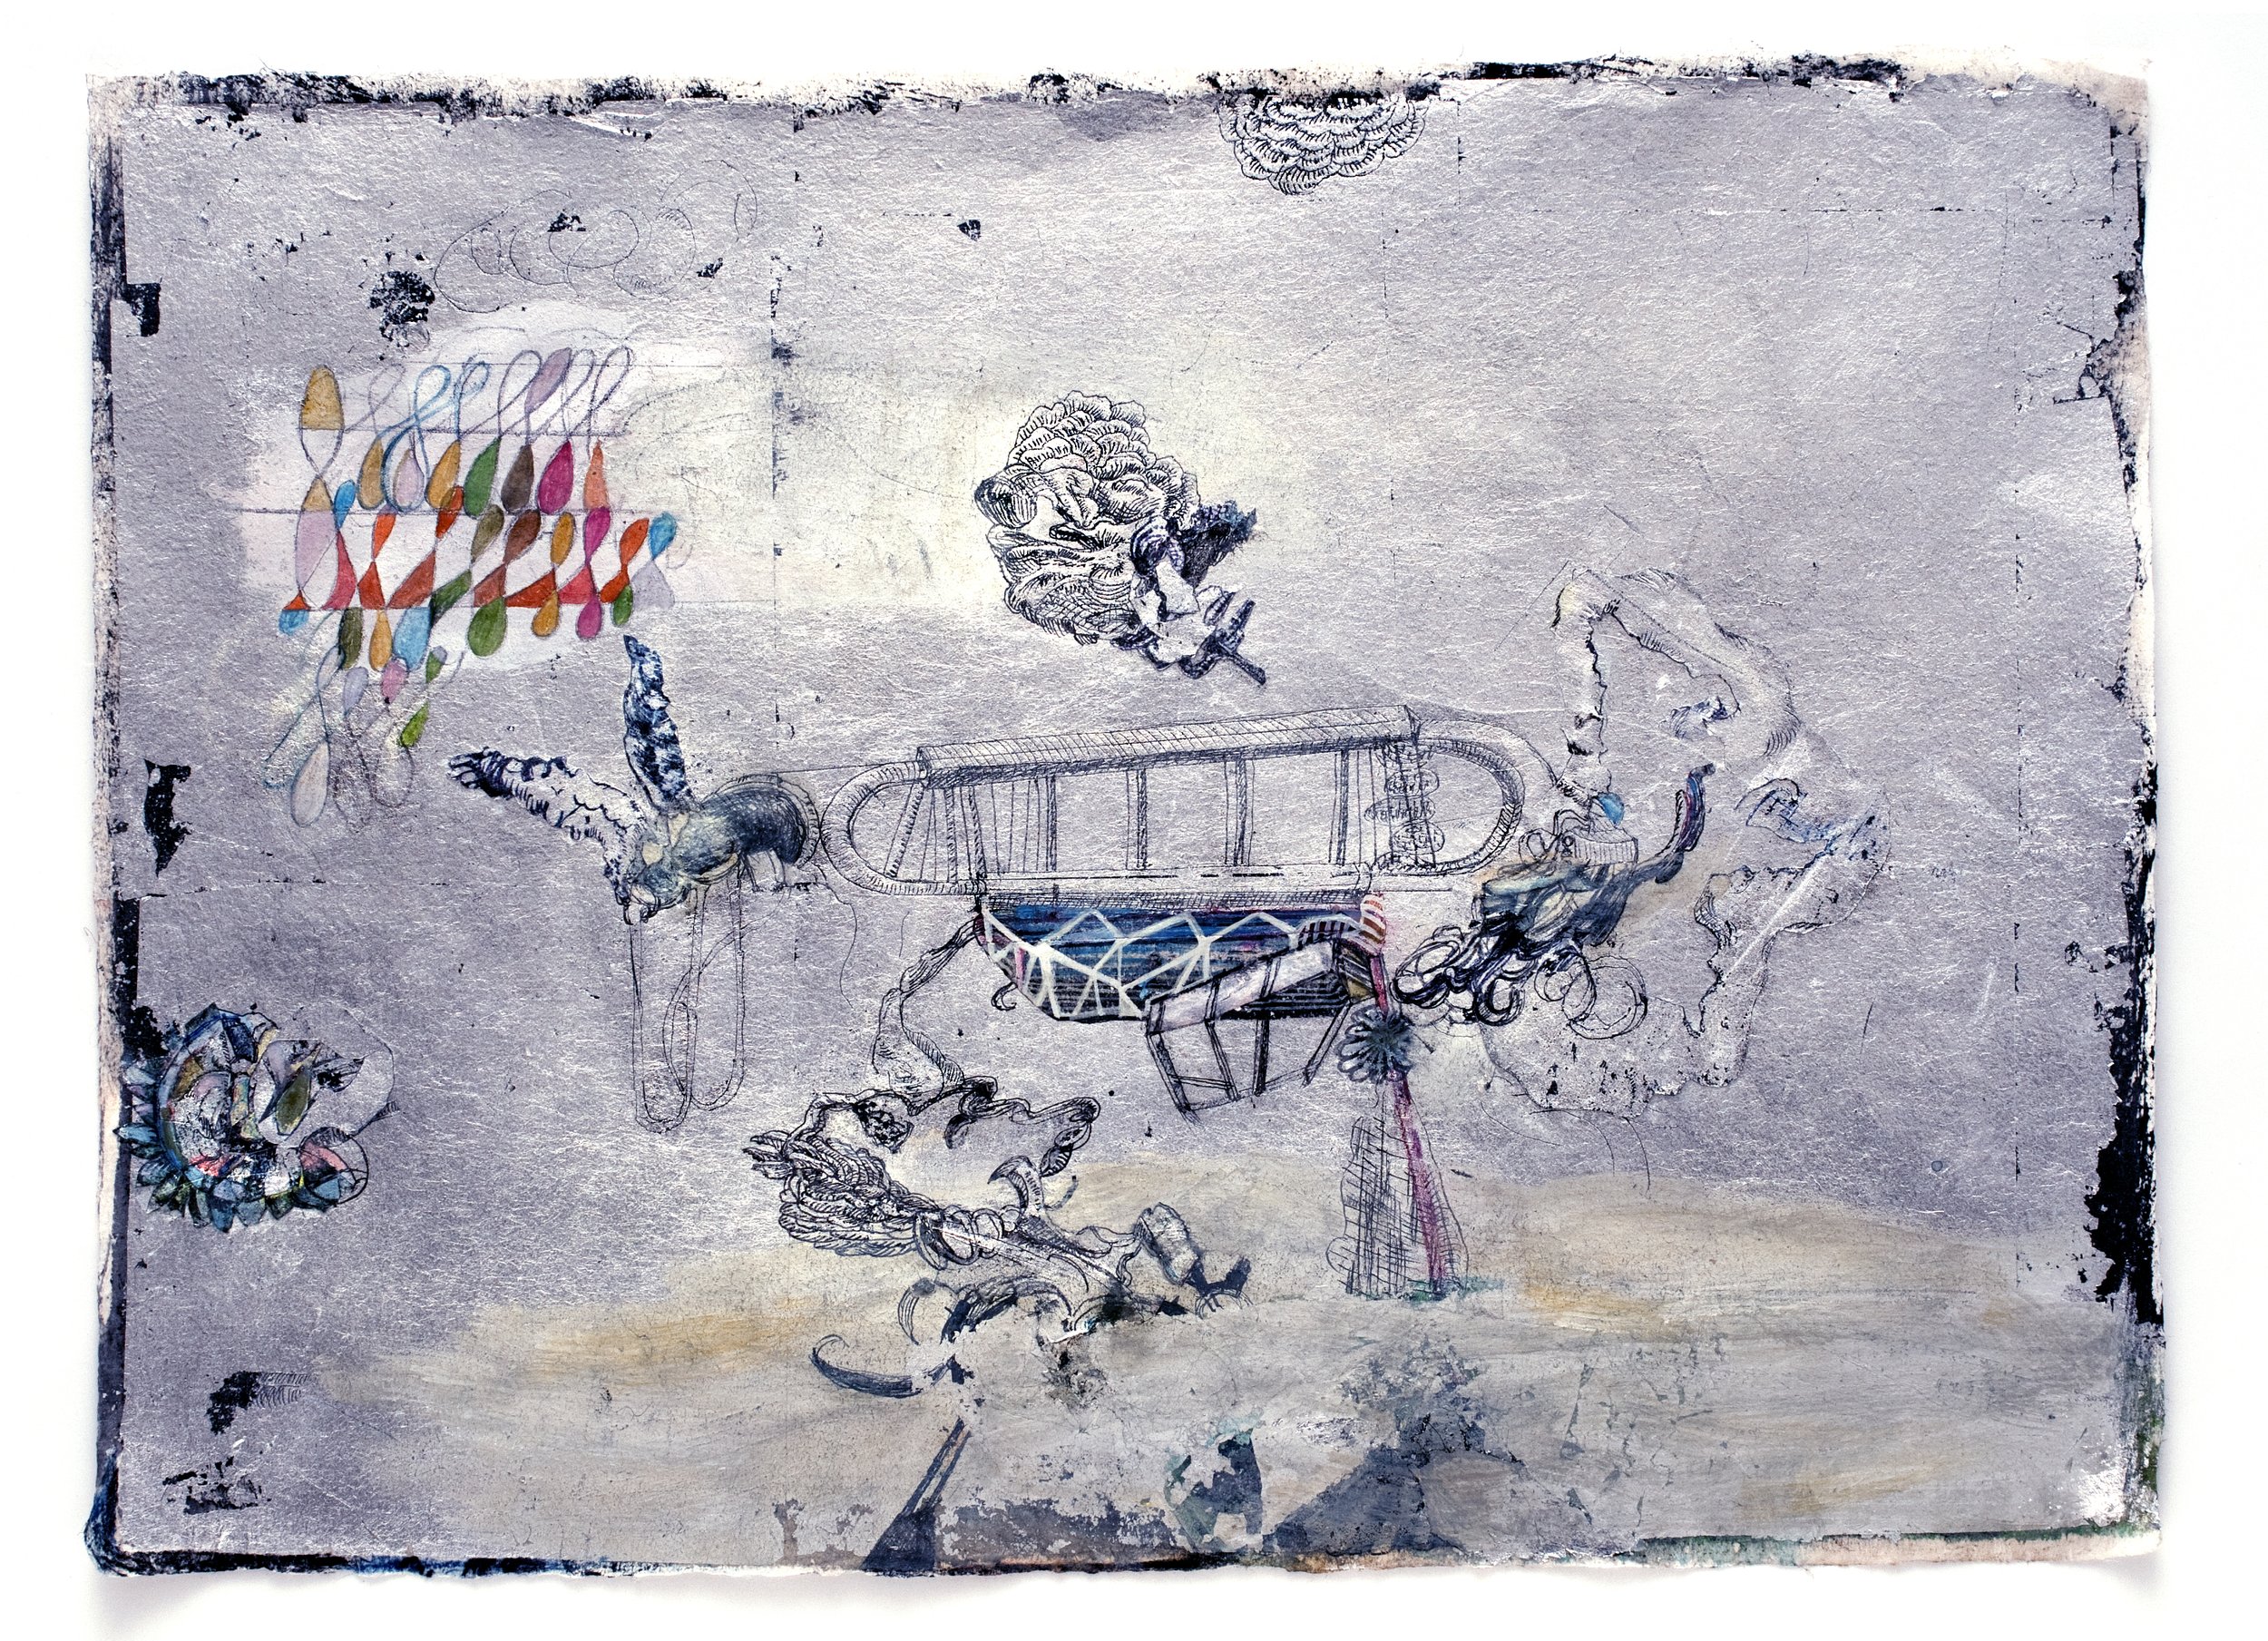   And Rare Things To Be Thankful , 2013   Ink, pencil, gouache on silver leaf alloy on paper   12.25 ”h x 16.75 ”w     